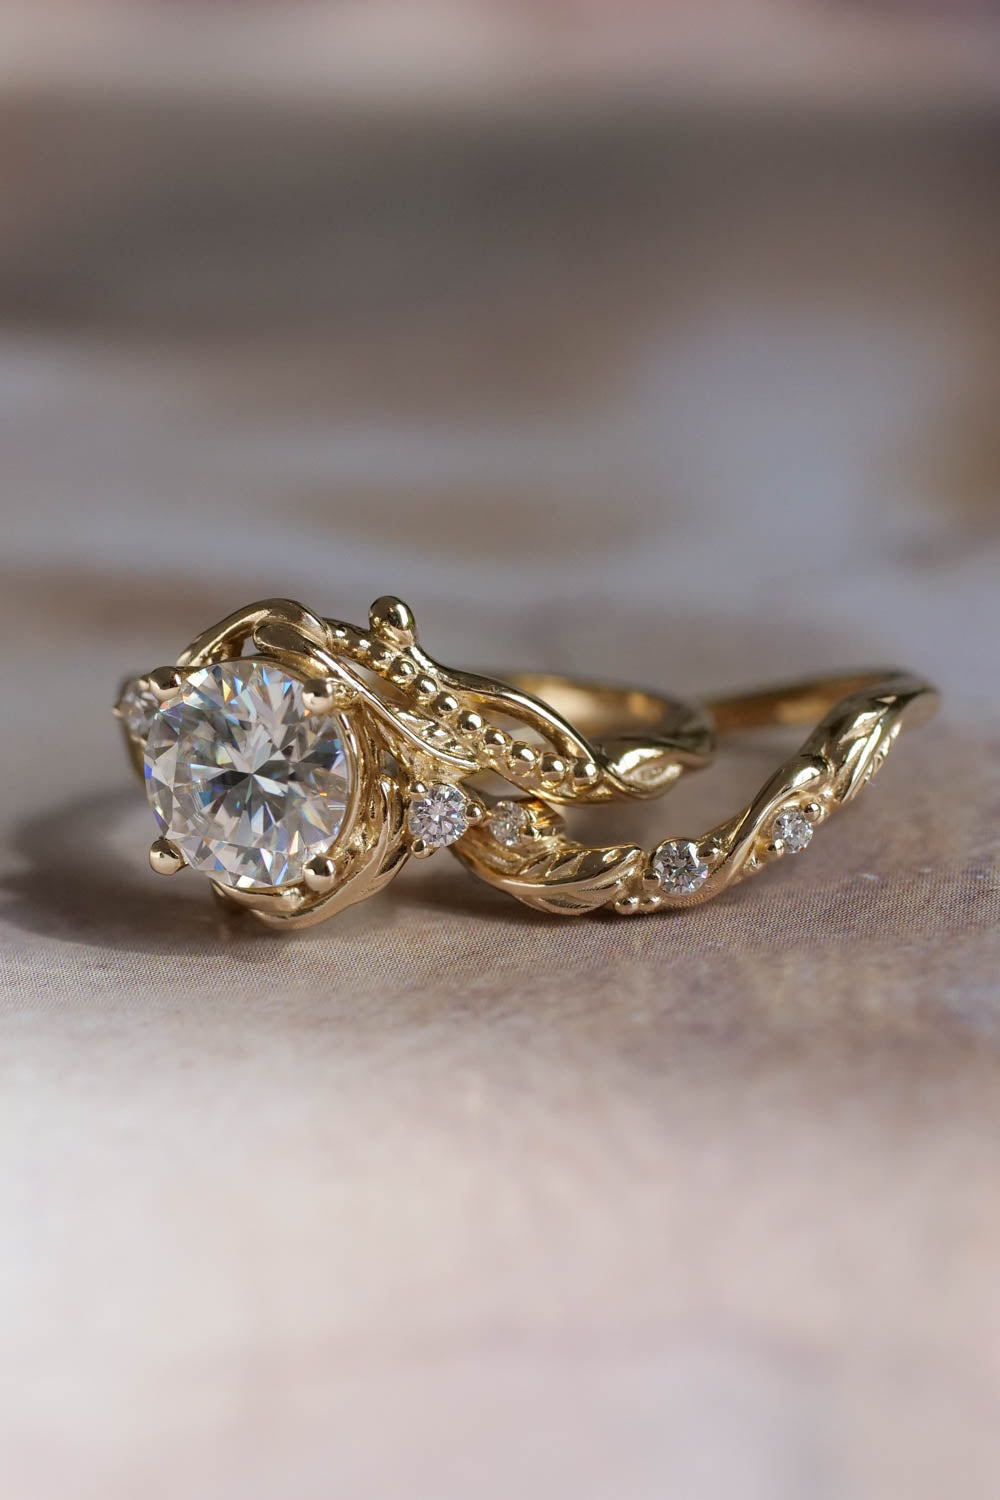 engagement and wedding band set - Moissanite bridal ring set in yellow gold 